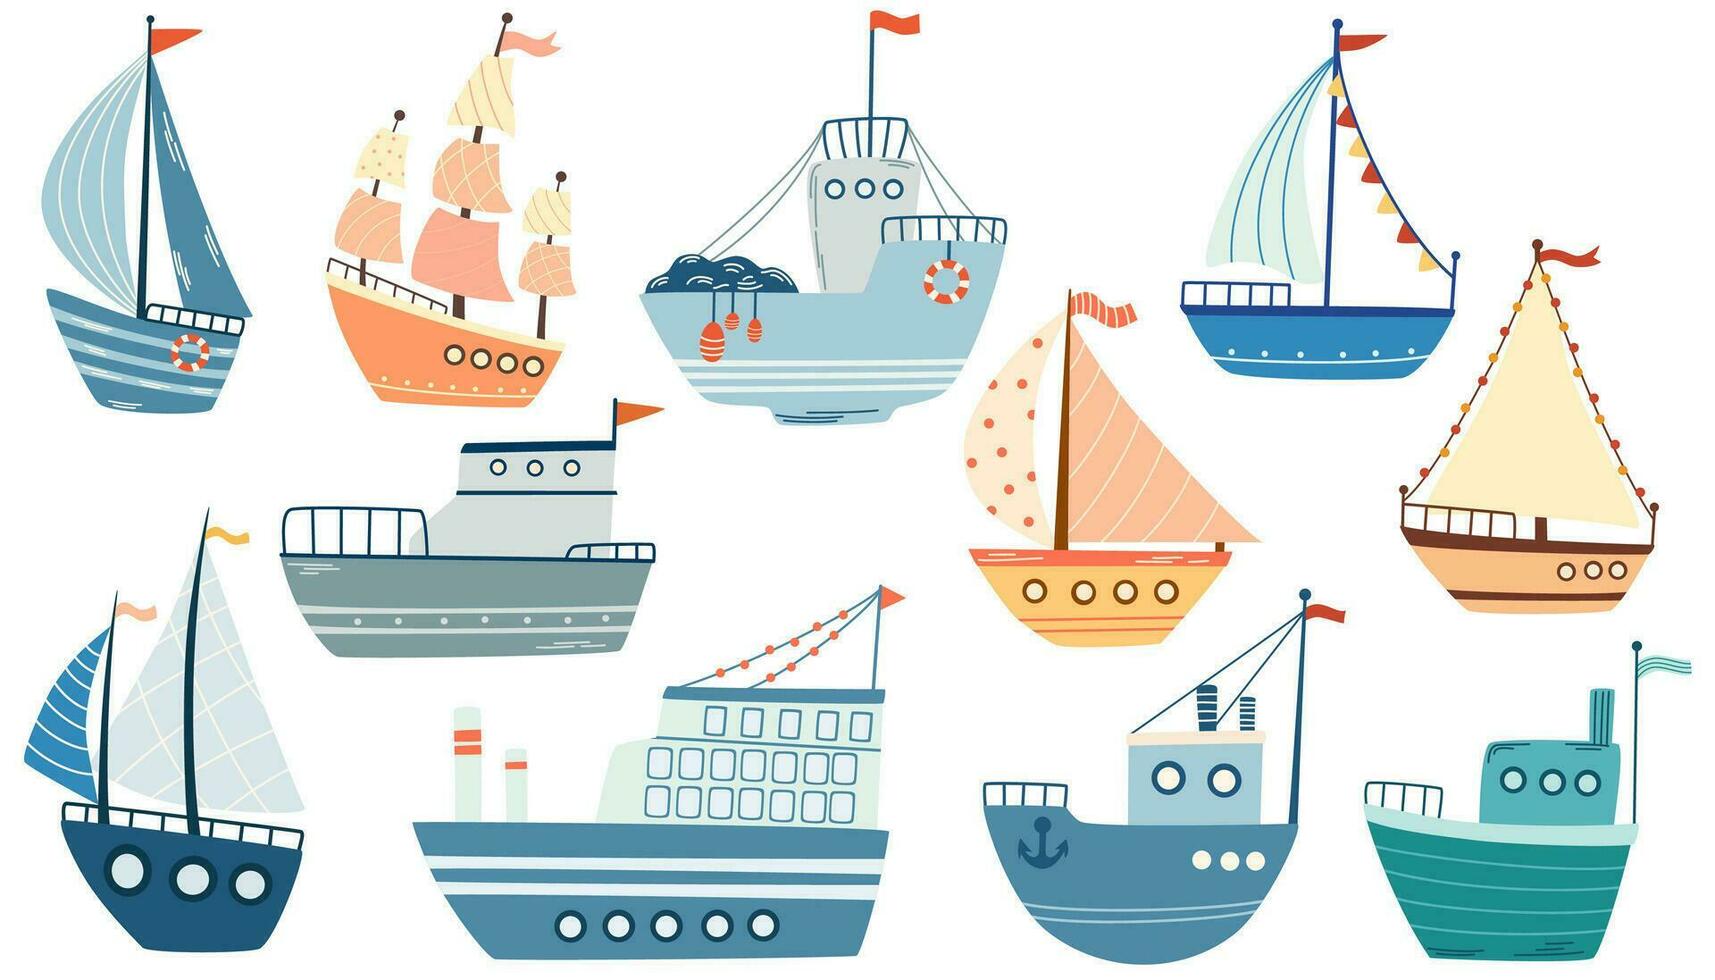 Ships Set. Fishing boat, sailboat, Sailing vessel, sea mode of transport. Children's illustration for design of children's rooms, clothing, textiles. Vector hand draw illustration isolated